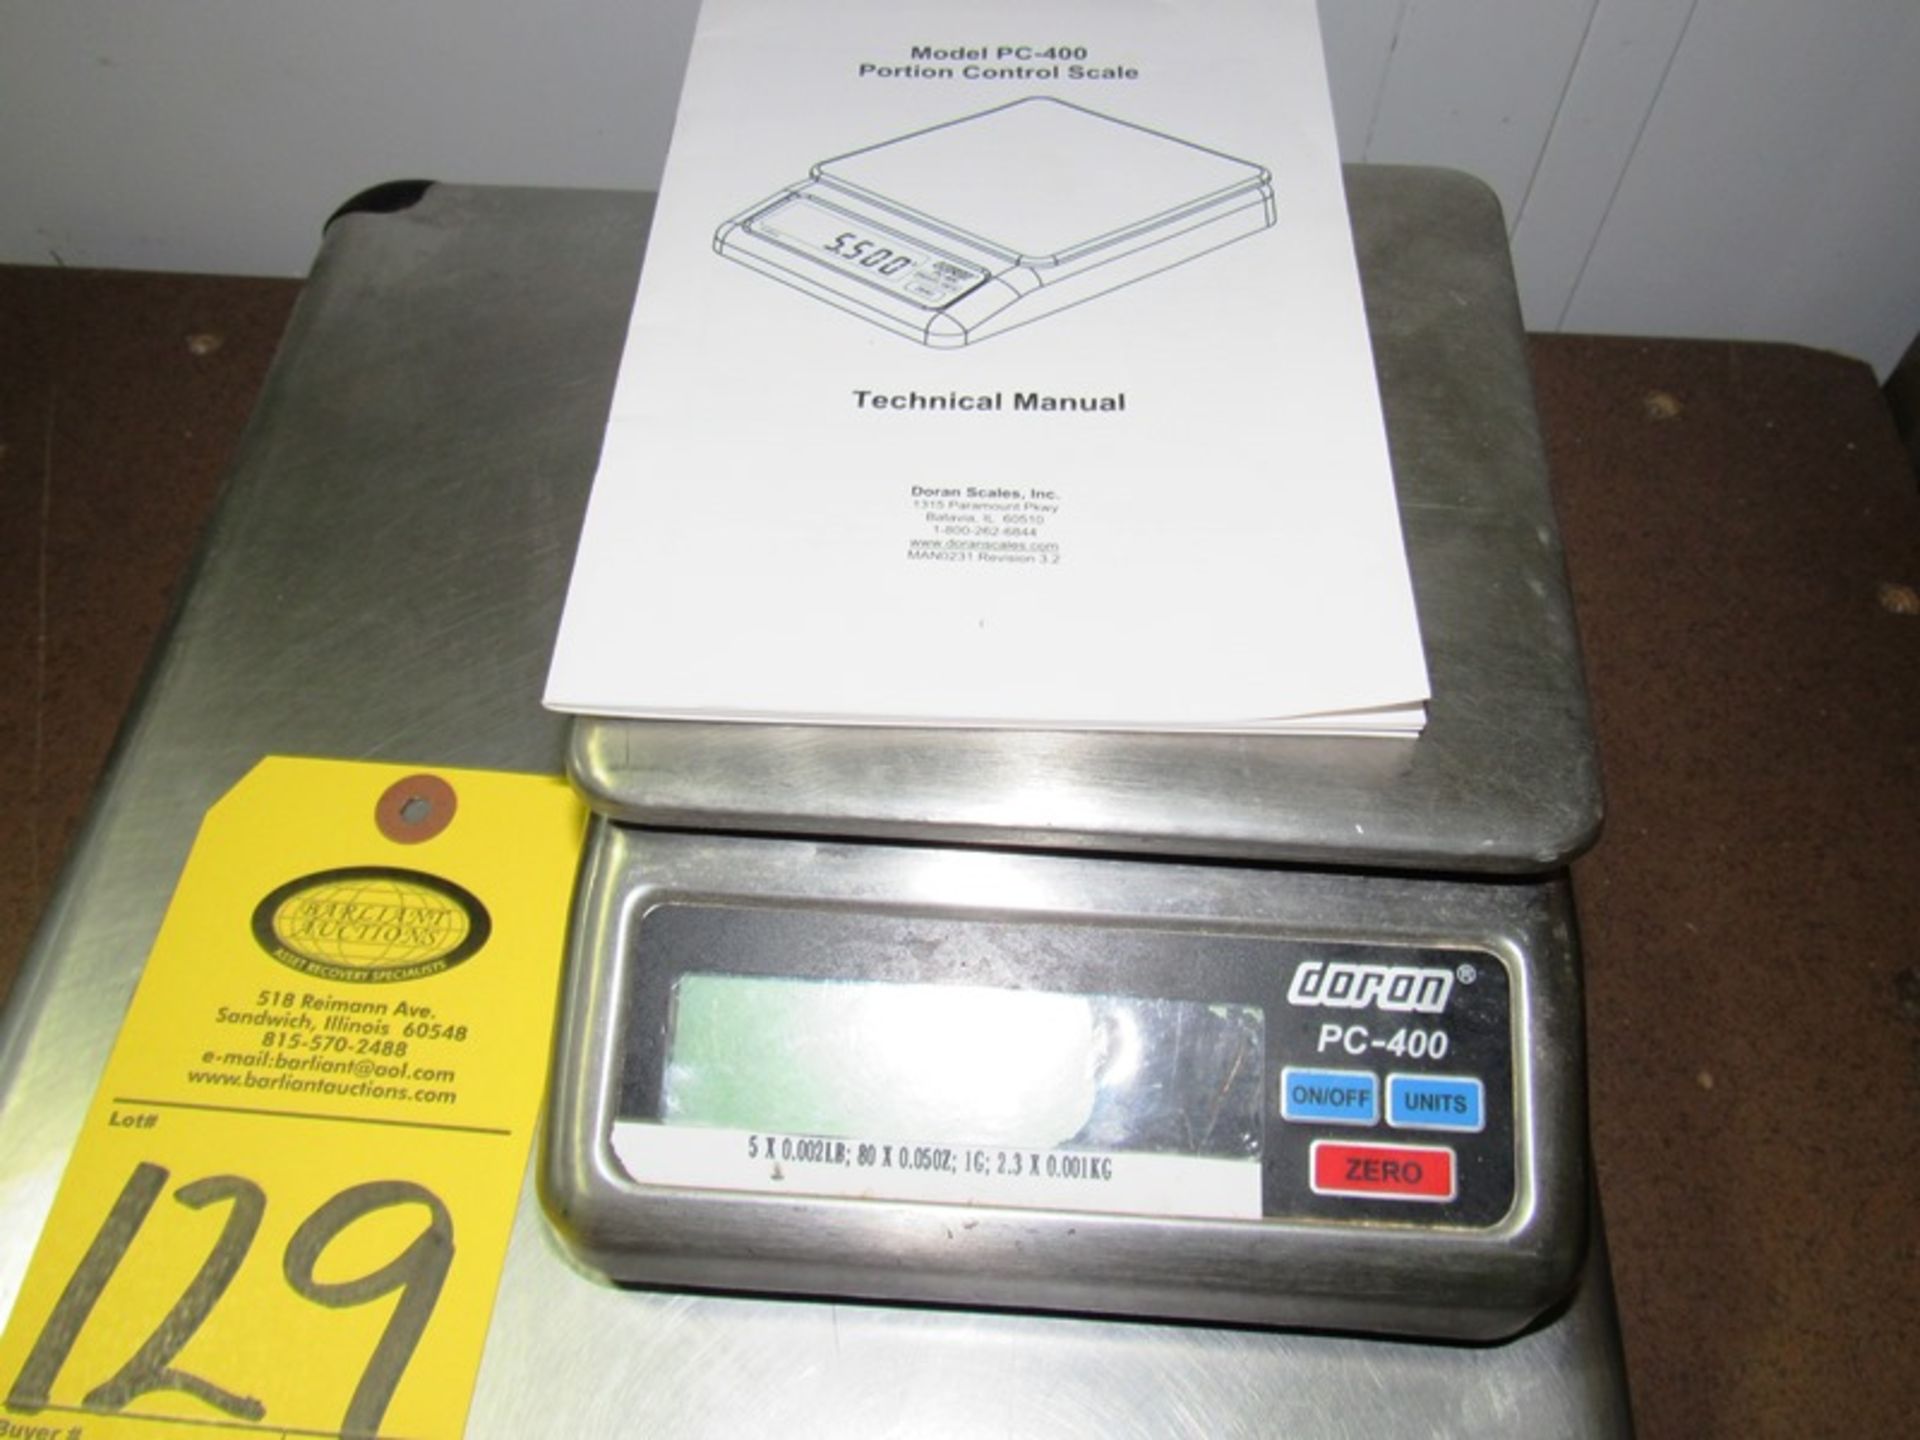 AND Mdl. FG-30KX Digital Scale, 12" W X 15" L stainless steel top, 60 Lb. capacity & Doron PC400 - Image 2 of 2